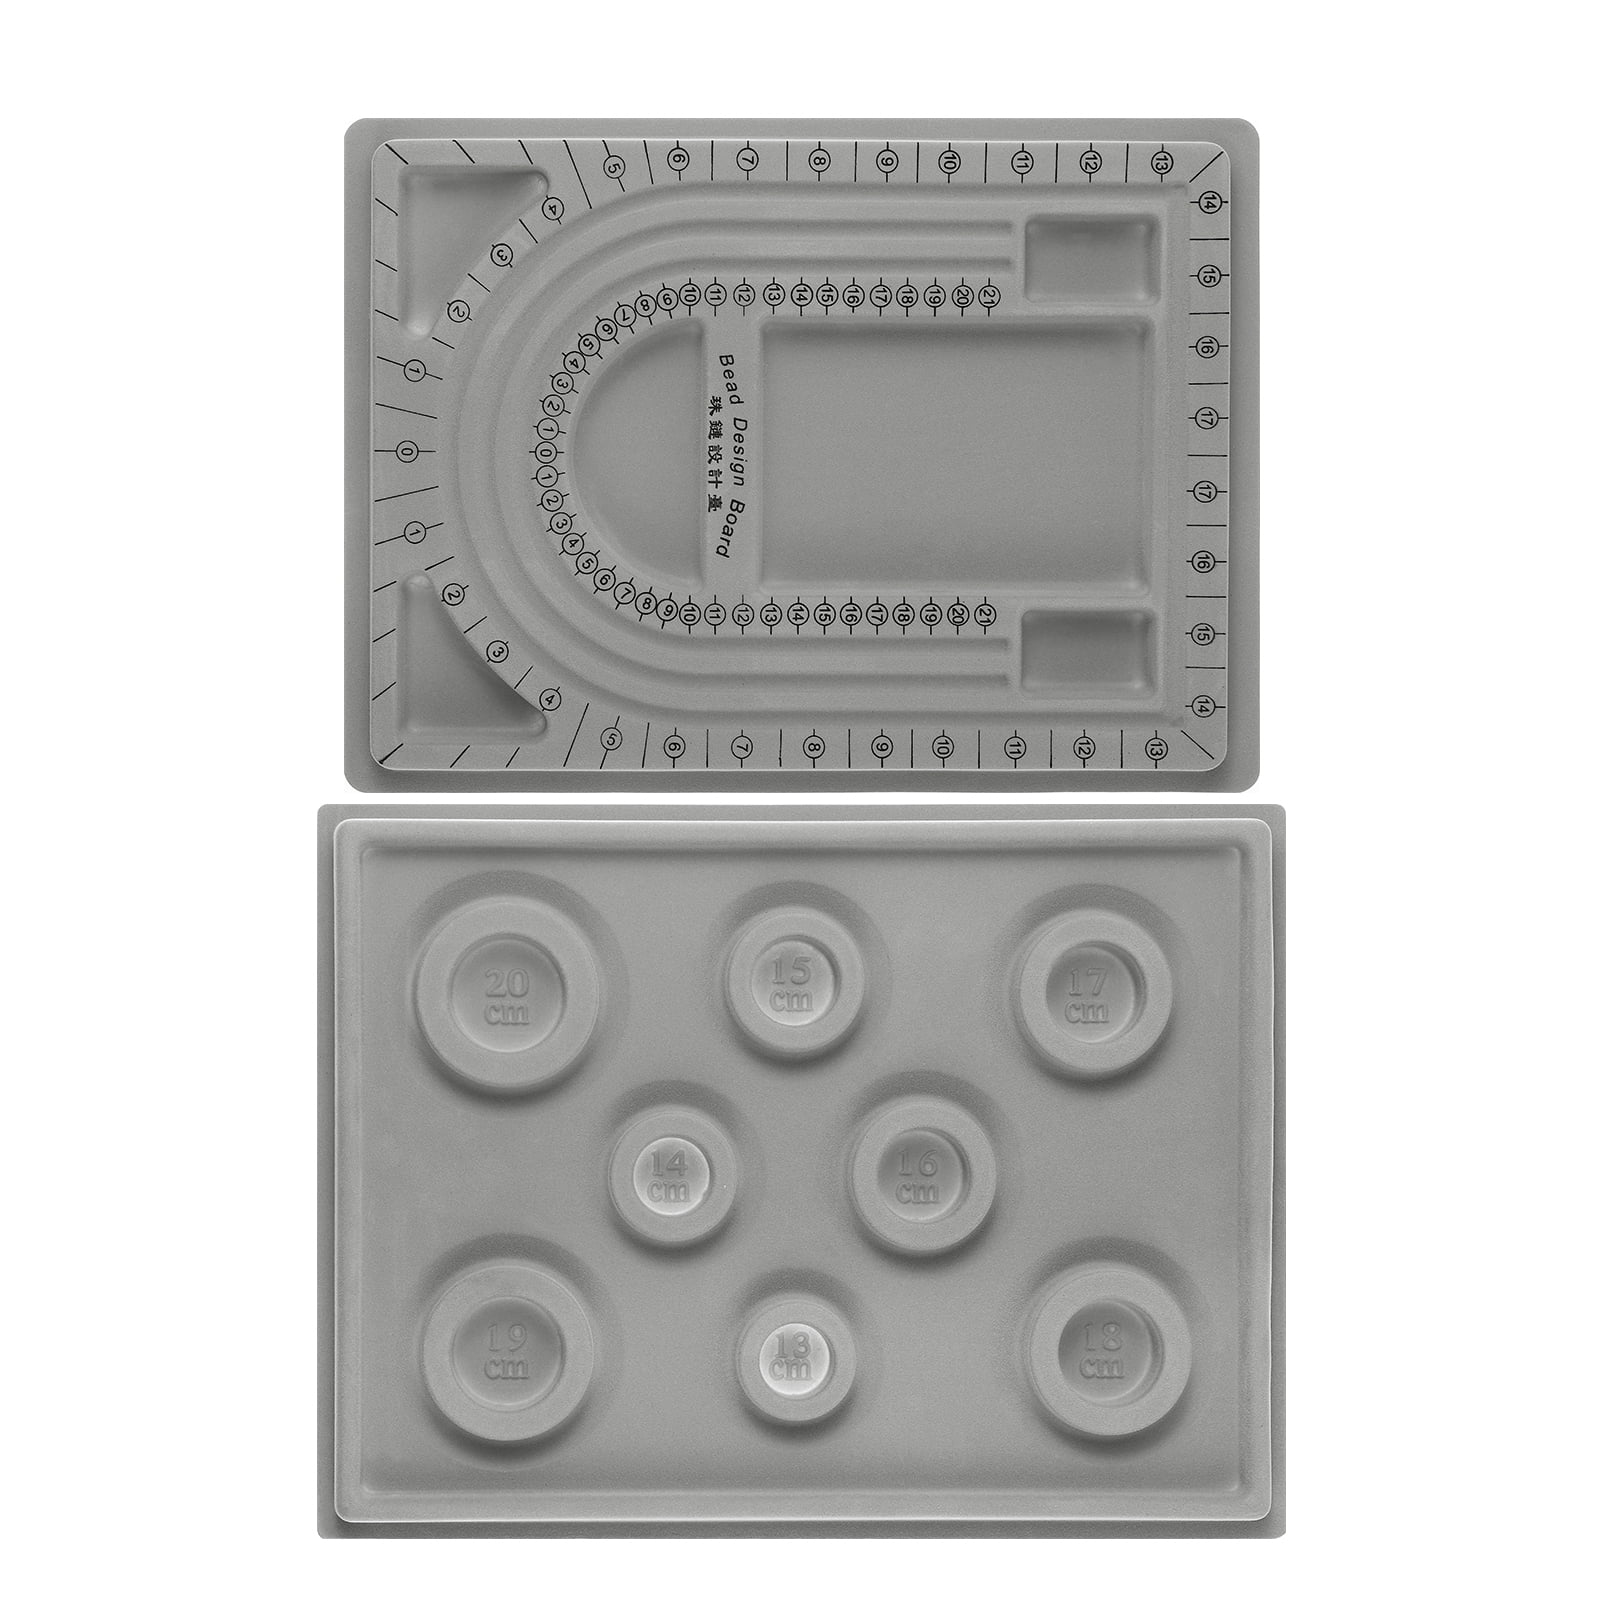 Bead Board Jewelry Tray Beading Making Design The Bracelet Flocked Grey Supplies Beadboard Beads Boards Tools, Adult Unisex, Size: 35.00